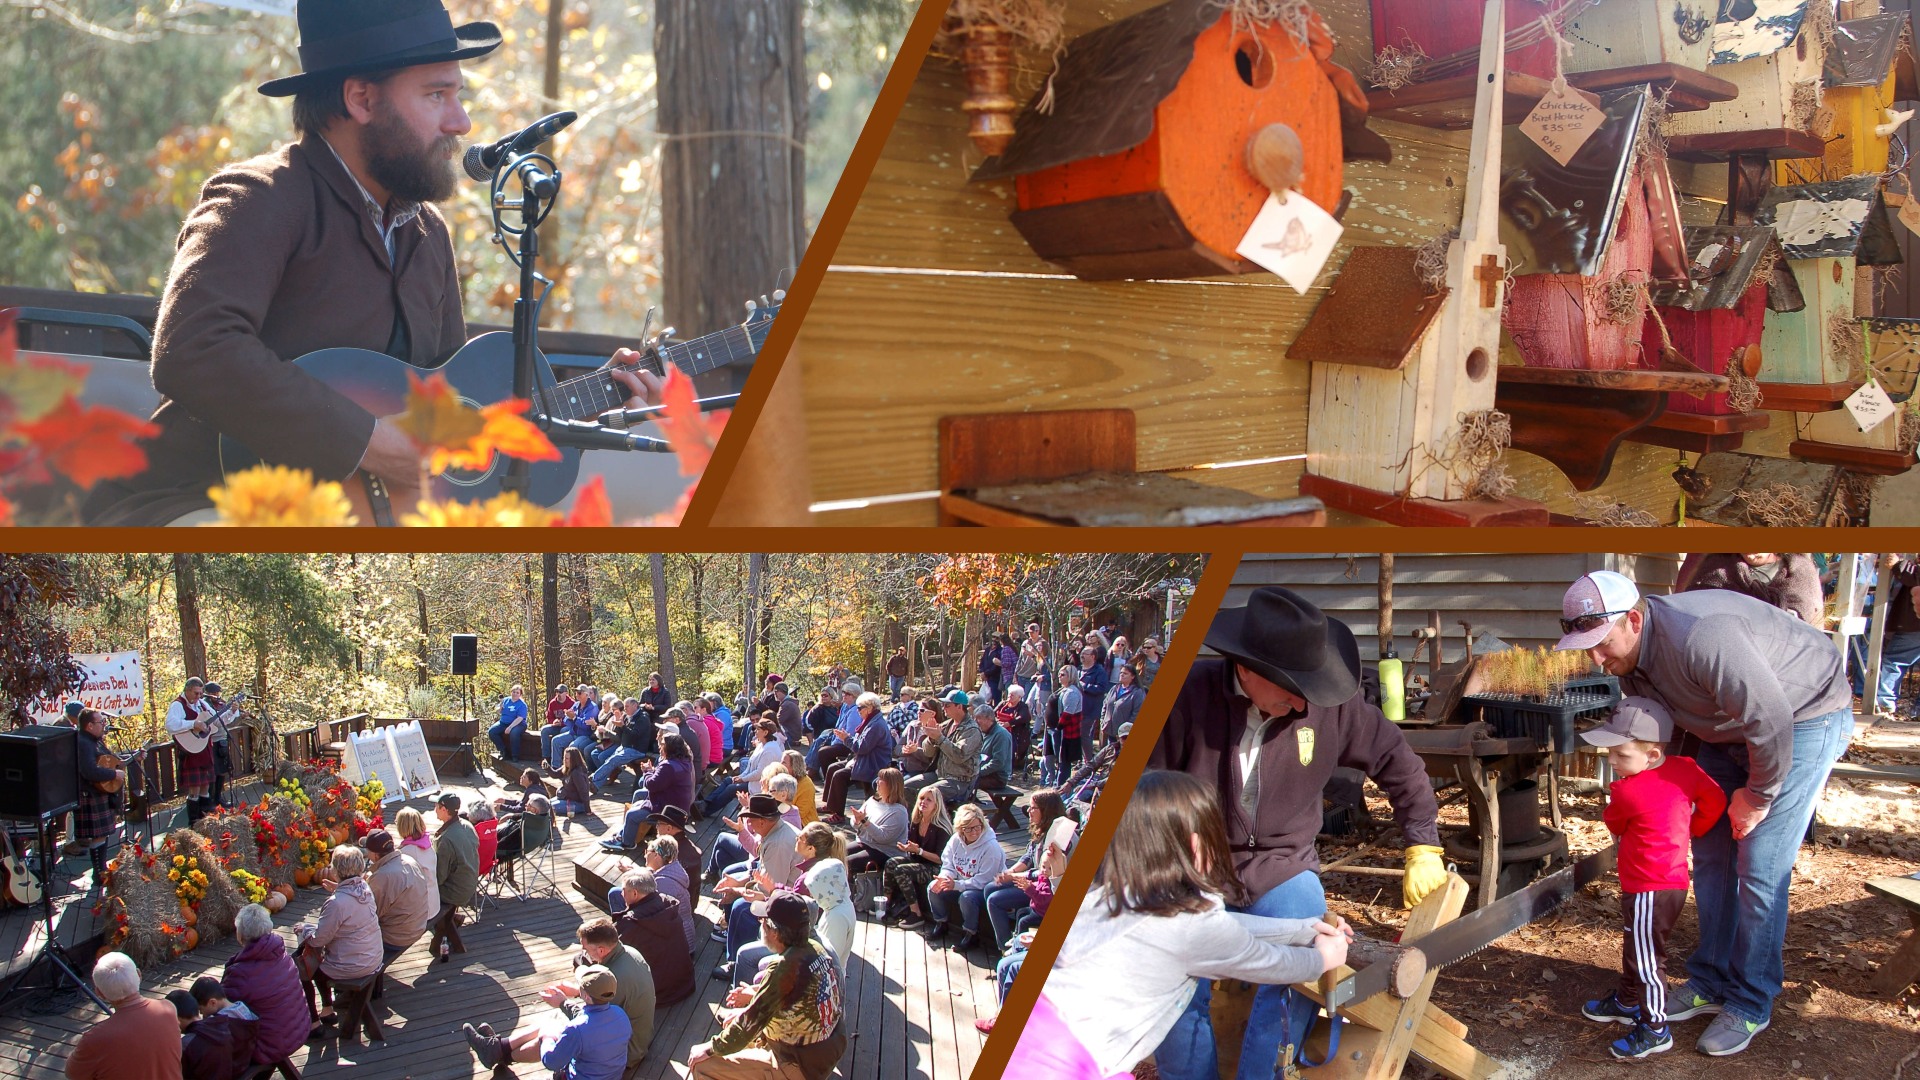 Photo collage with 4 images - 1- folk singer, 2- wooden bird houses, 3- audience watching Celtic band, 4- cross cut saw.